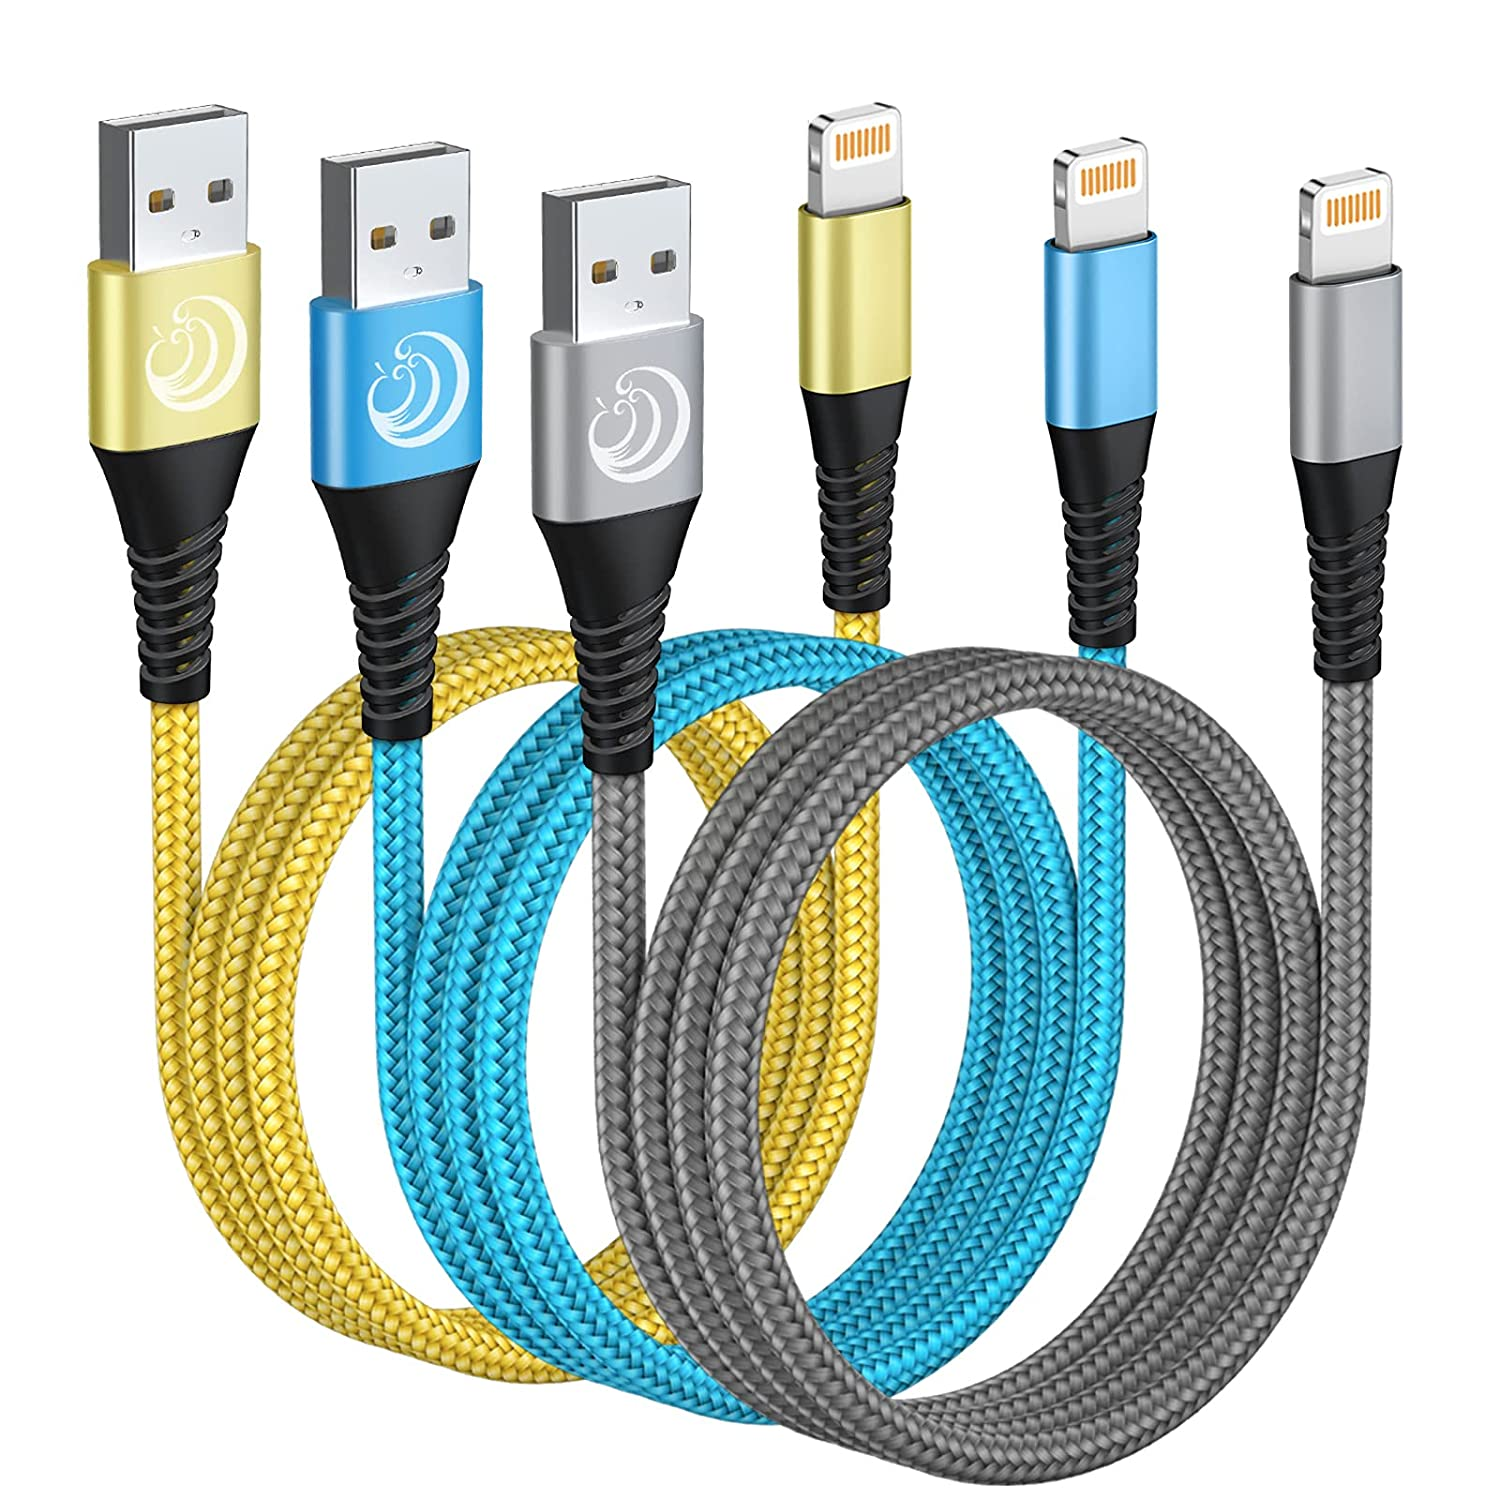 iPhone Charger Cord [6Ft 3-Pack Mfi Certified], Iphone Charging Cable, Durable Nylon Braided Iphone Lightning Cable Fast Charging 